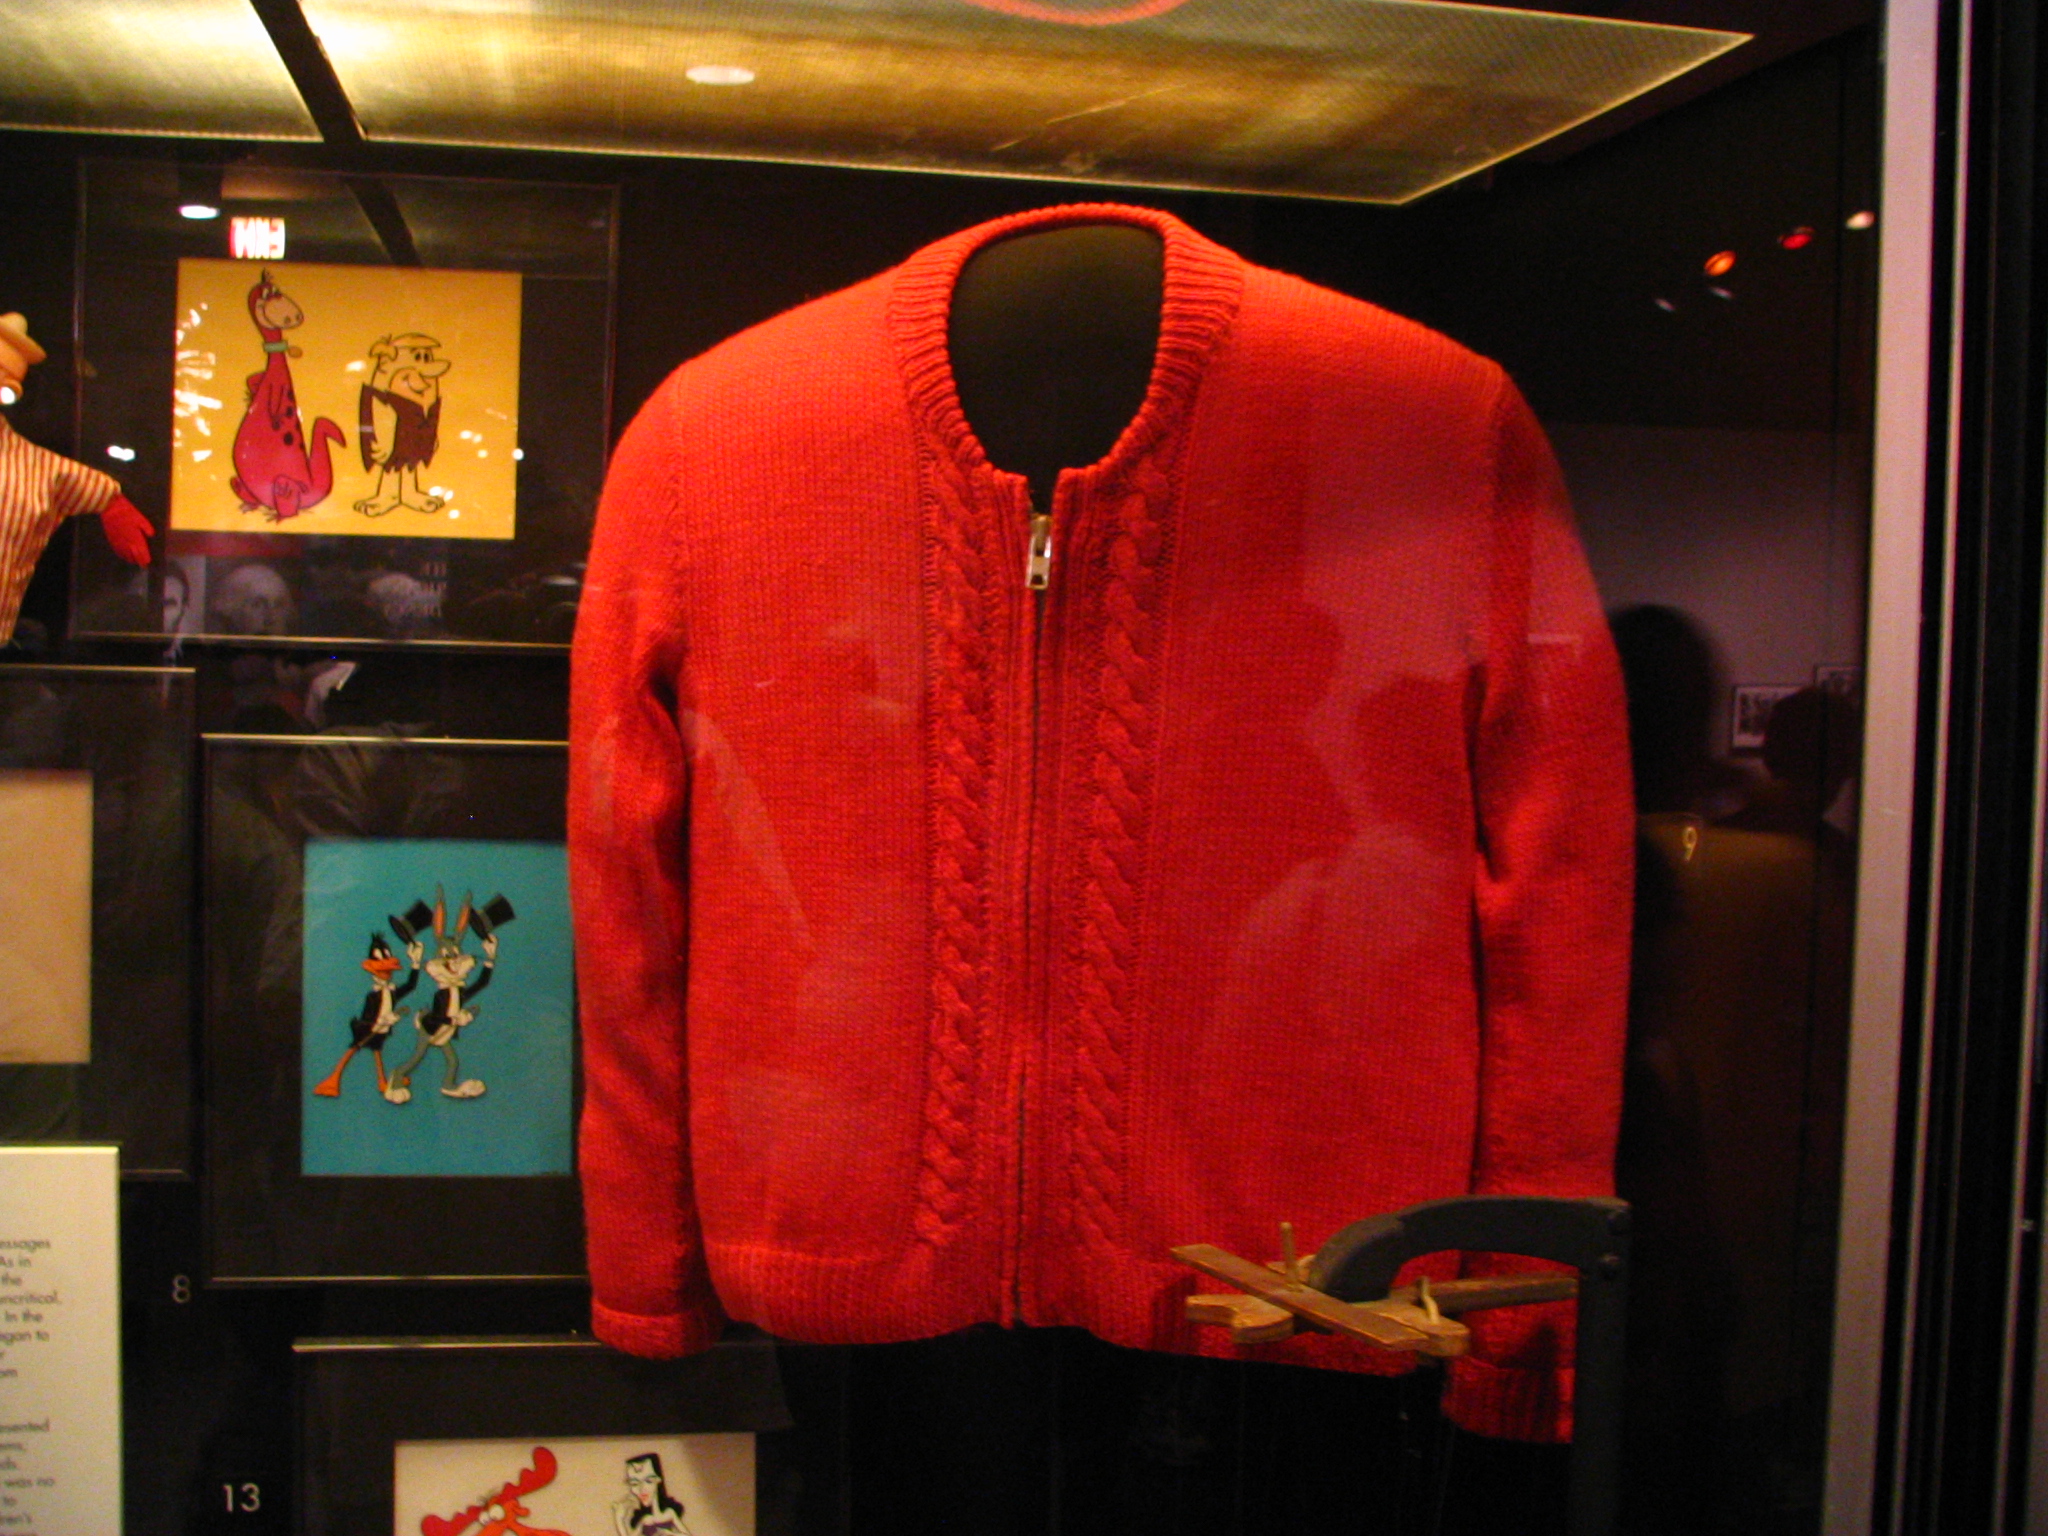 Mr. Rogers' red sweater in a museum showcase